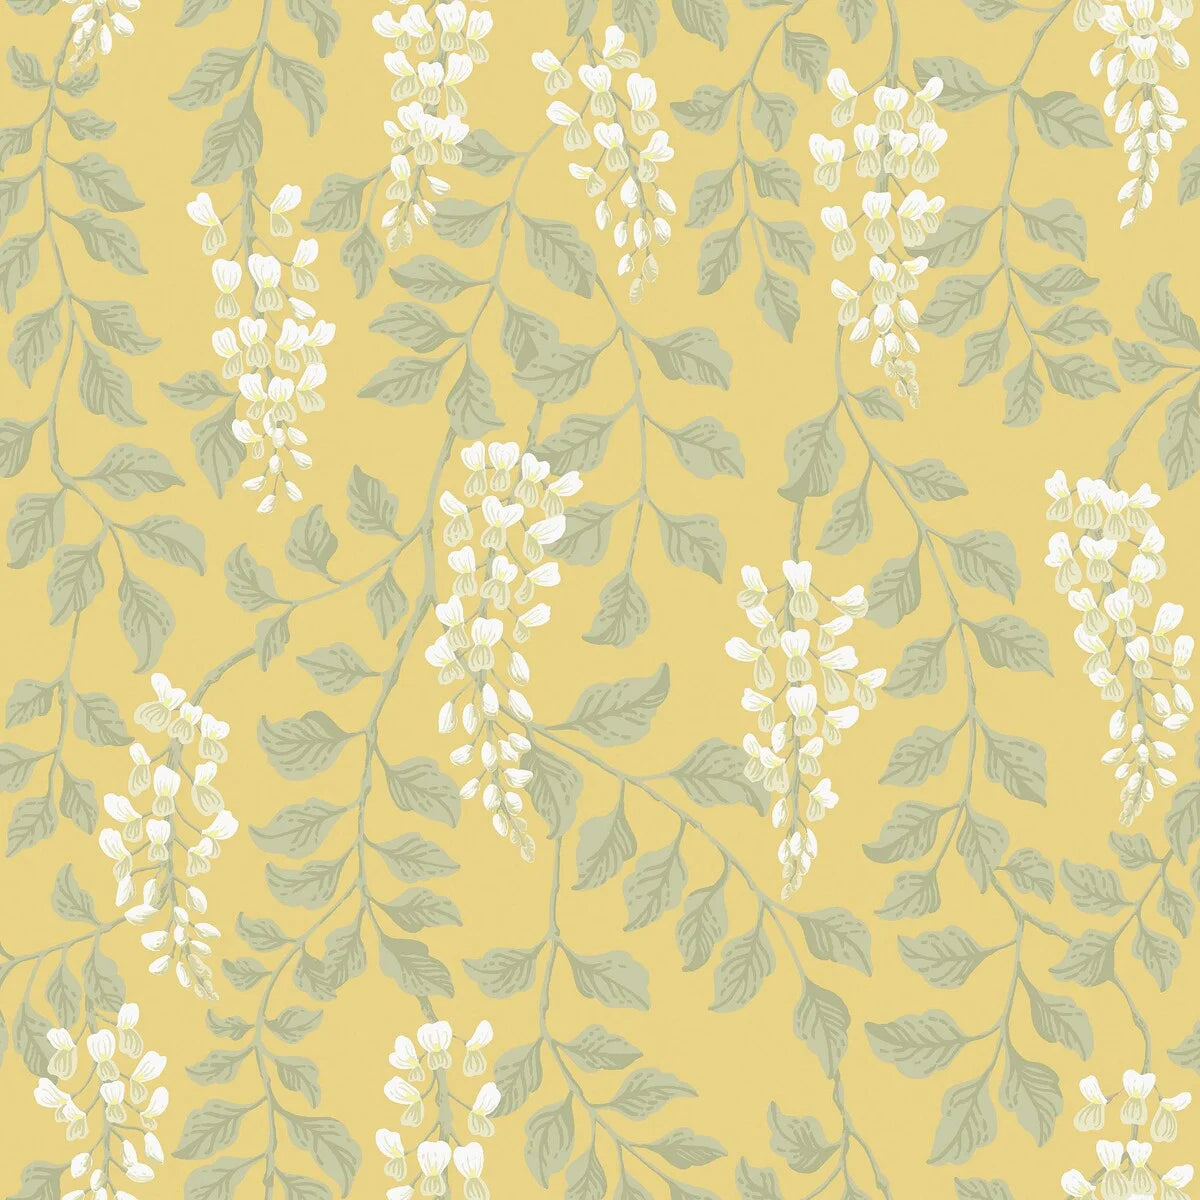 Infuse energy and positivity into your space with our Blåregn wallpaper set on a sunny and hopeful yellow background. 